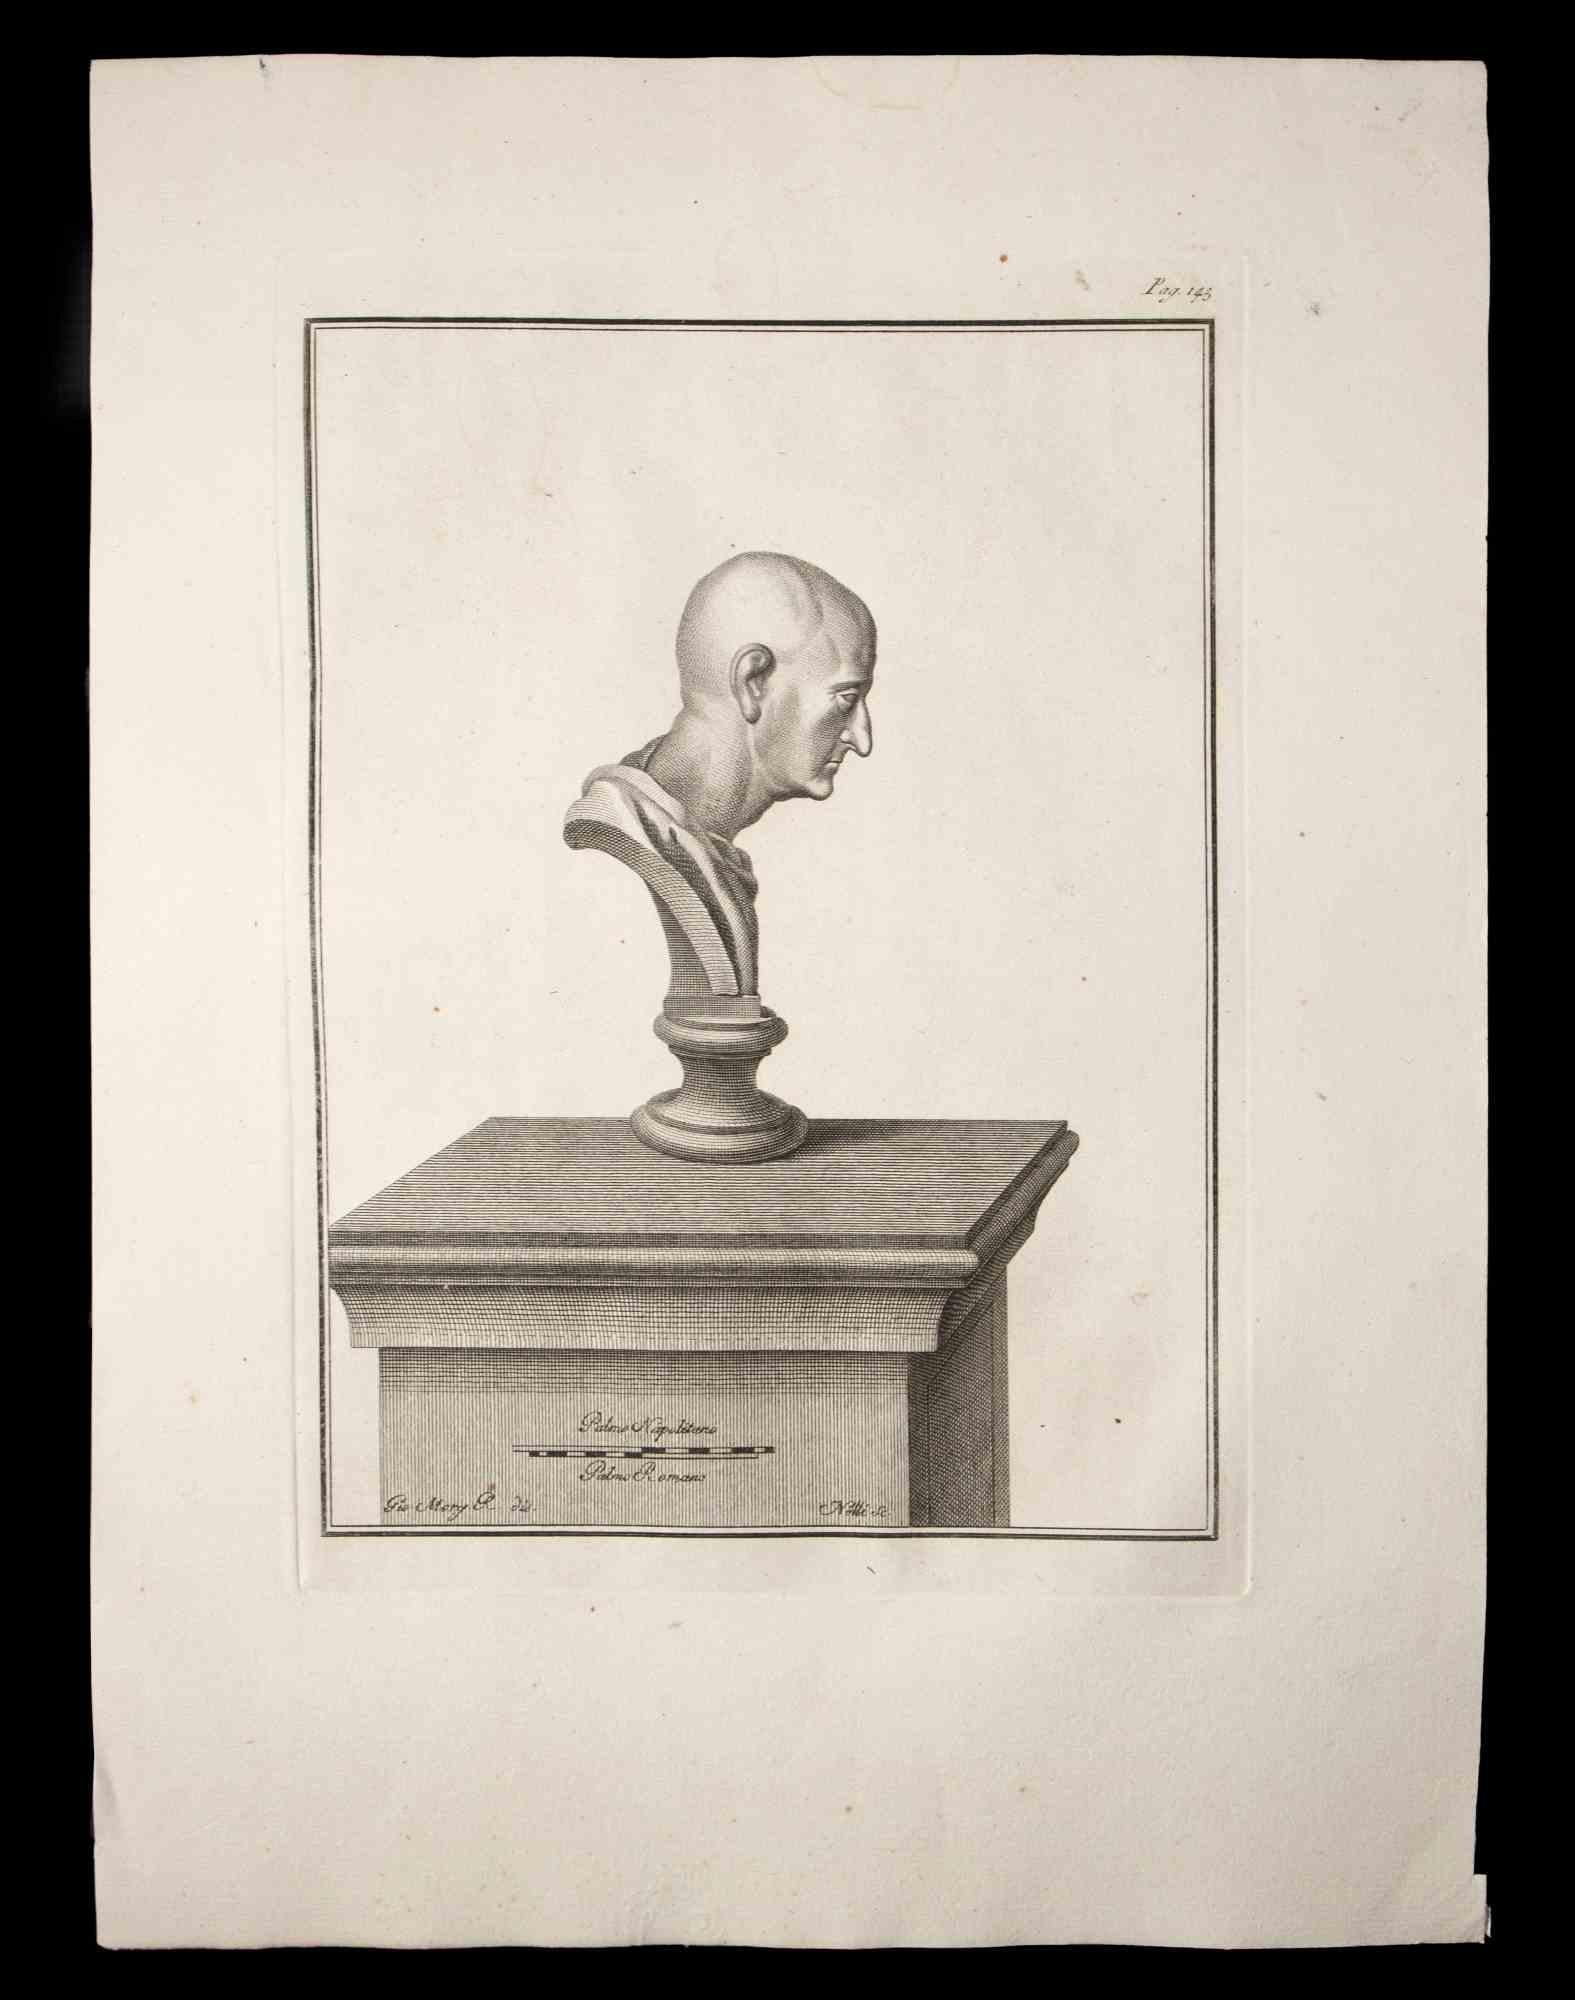 Ancient Roman Bust, from the series "Antiquities of Herculaneum", is an etching on paper realized by Carlo Nolli in the 18th century.

Signed on the plate, on the lower right.

Good conditions with minor stain.

The etching belongs to the print